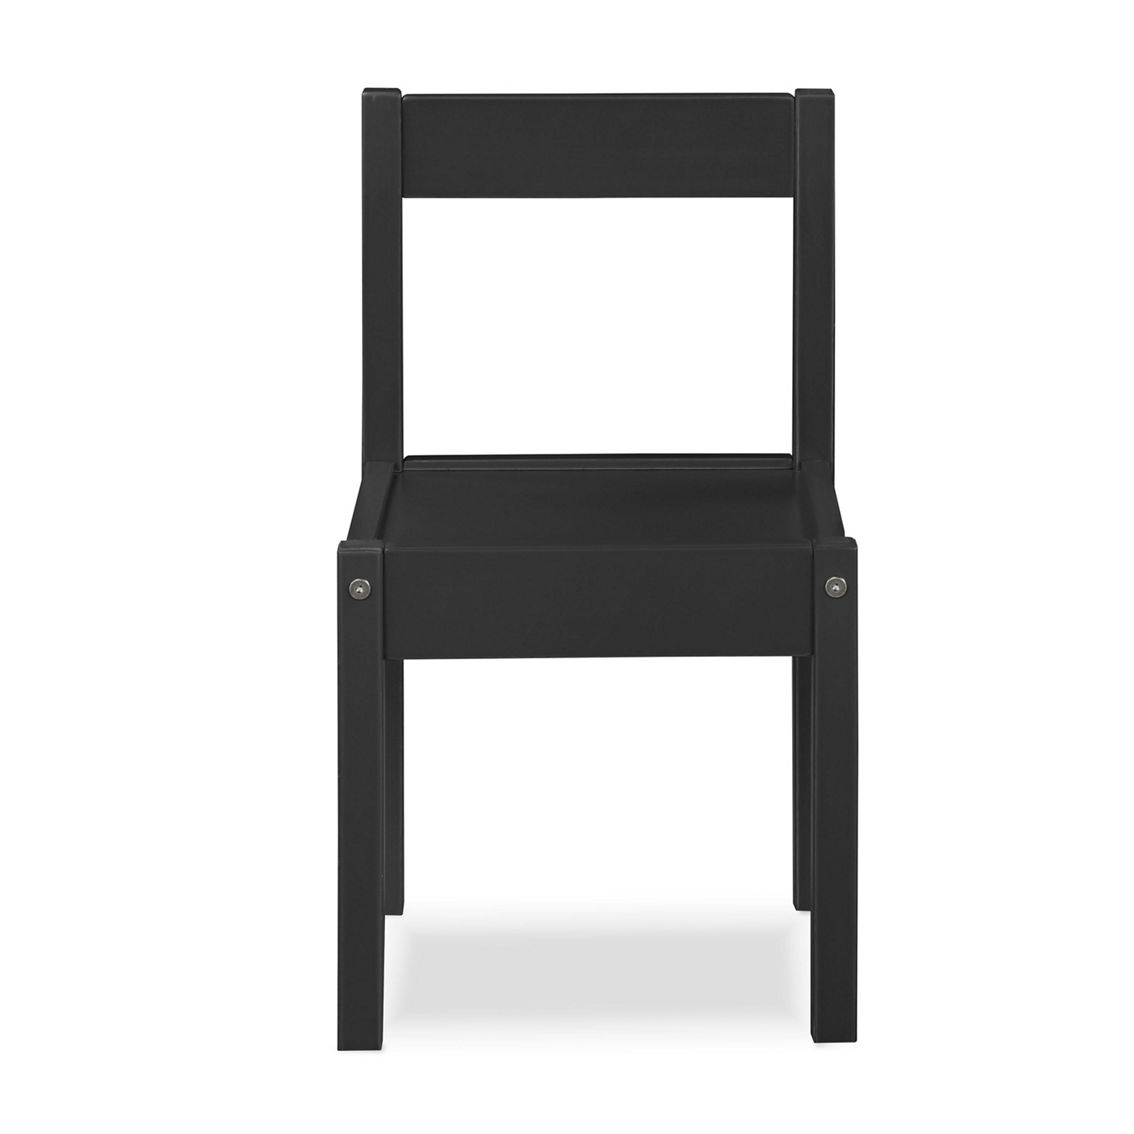 Olive & Opie Gibson 3-Piece Dry Erase Kids Table & Chair Set, Black - Image 3 of 5